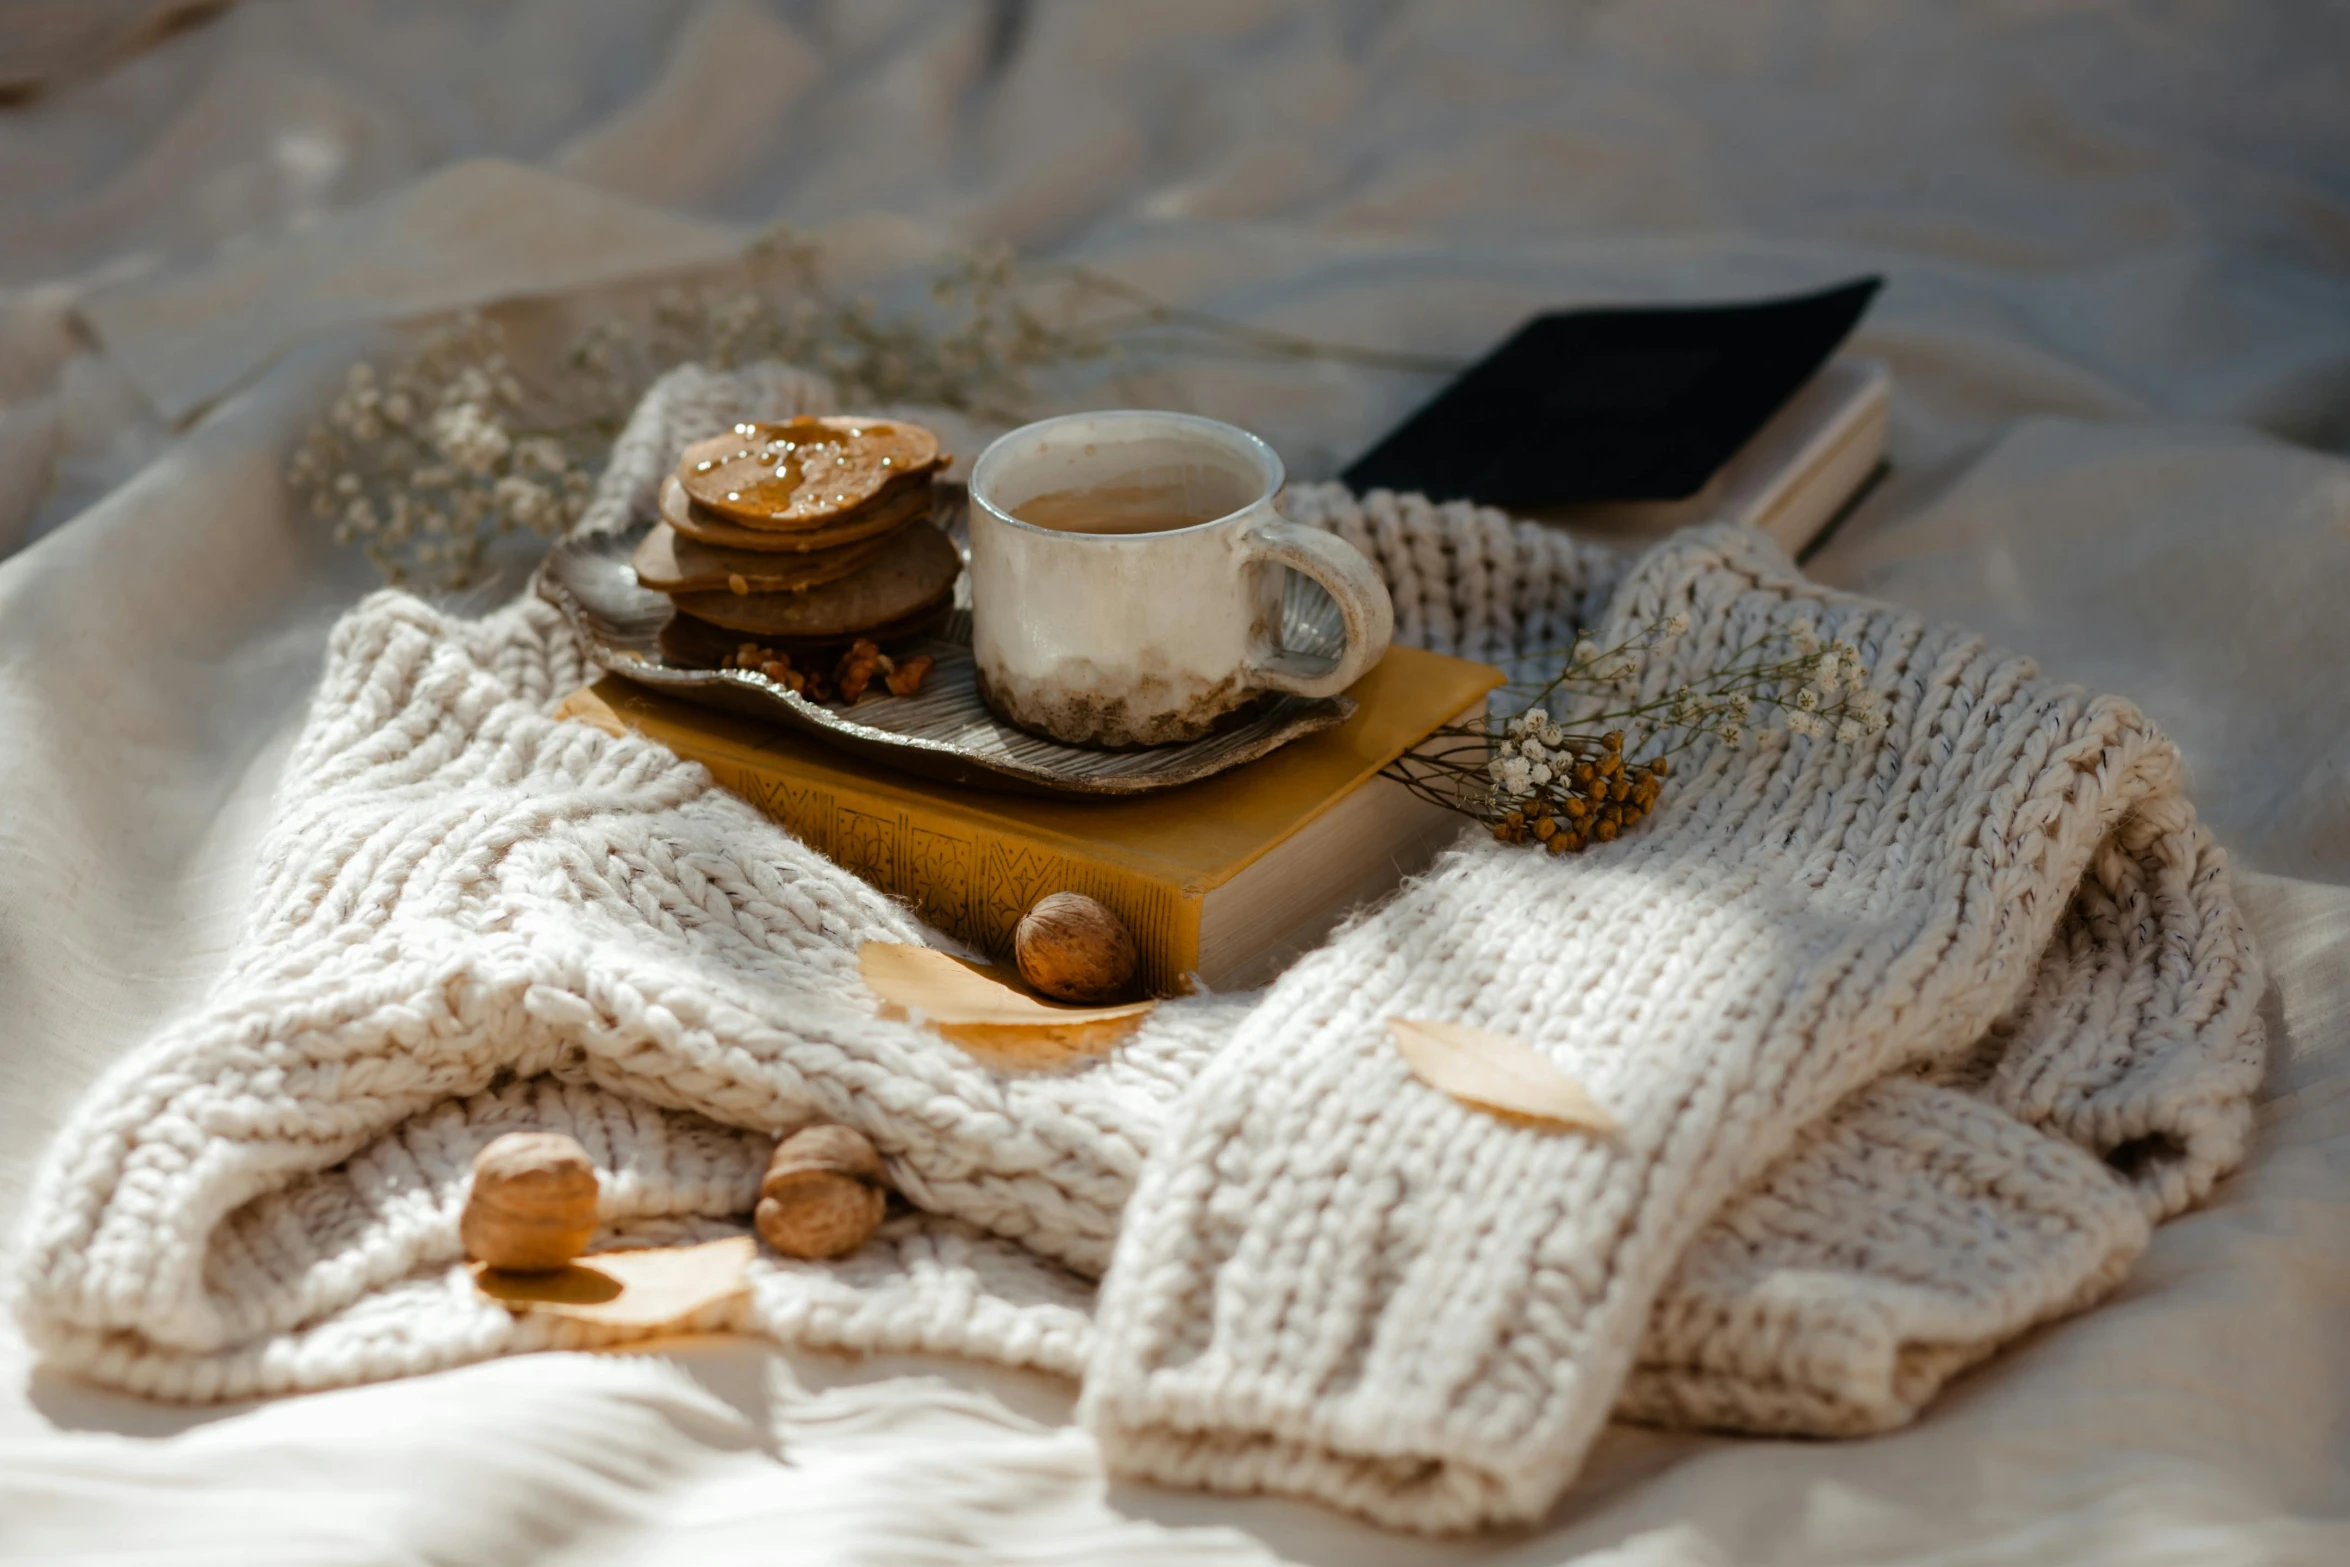 a blanket sitting on top of a bed next to a cup of coffee, a still life, trending on pexels, romanticism, brown sweater, snacks, storybook style, piled around